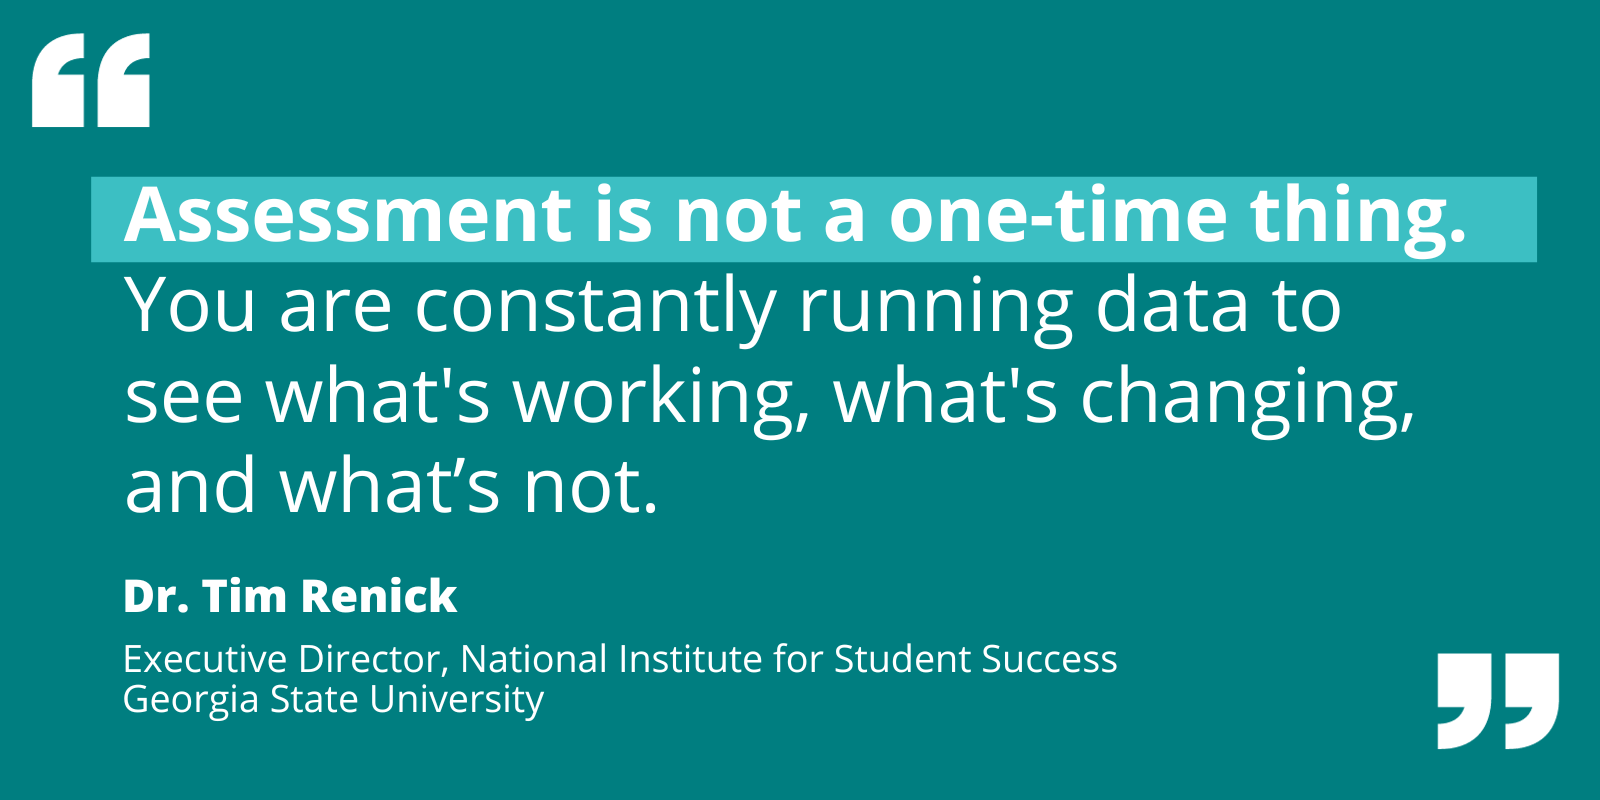 Quote by Tim Renick re: assessment as an ongoing process of observing data on what’s working and changing.